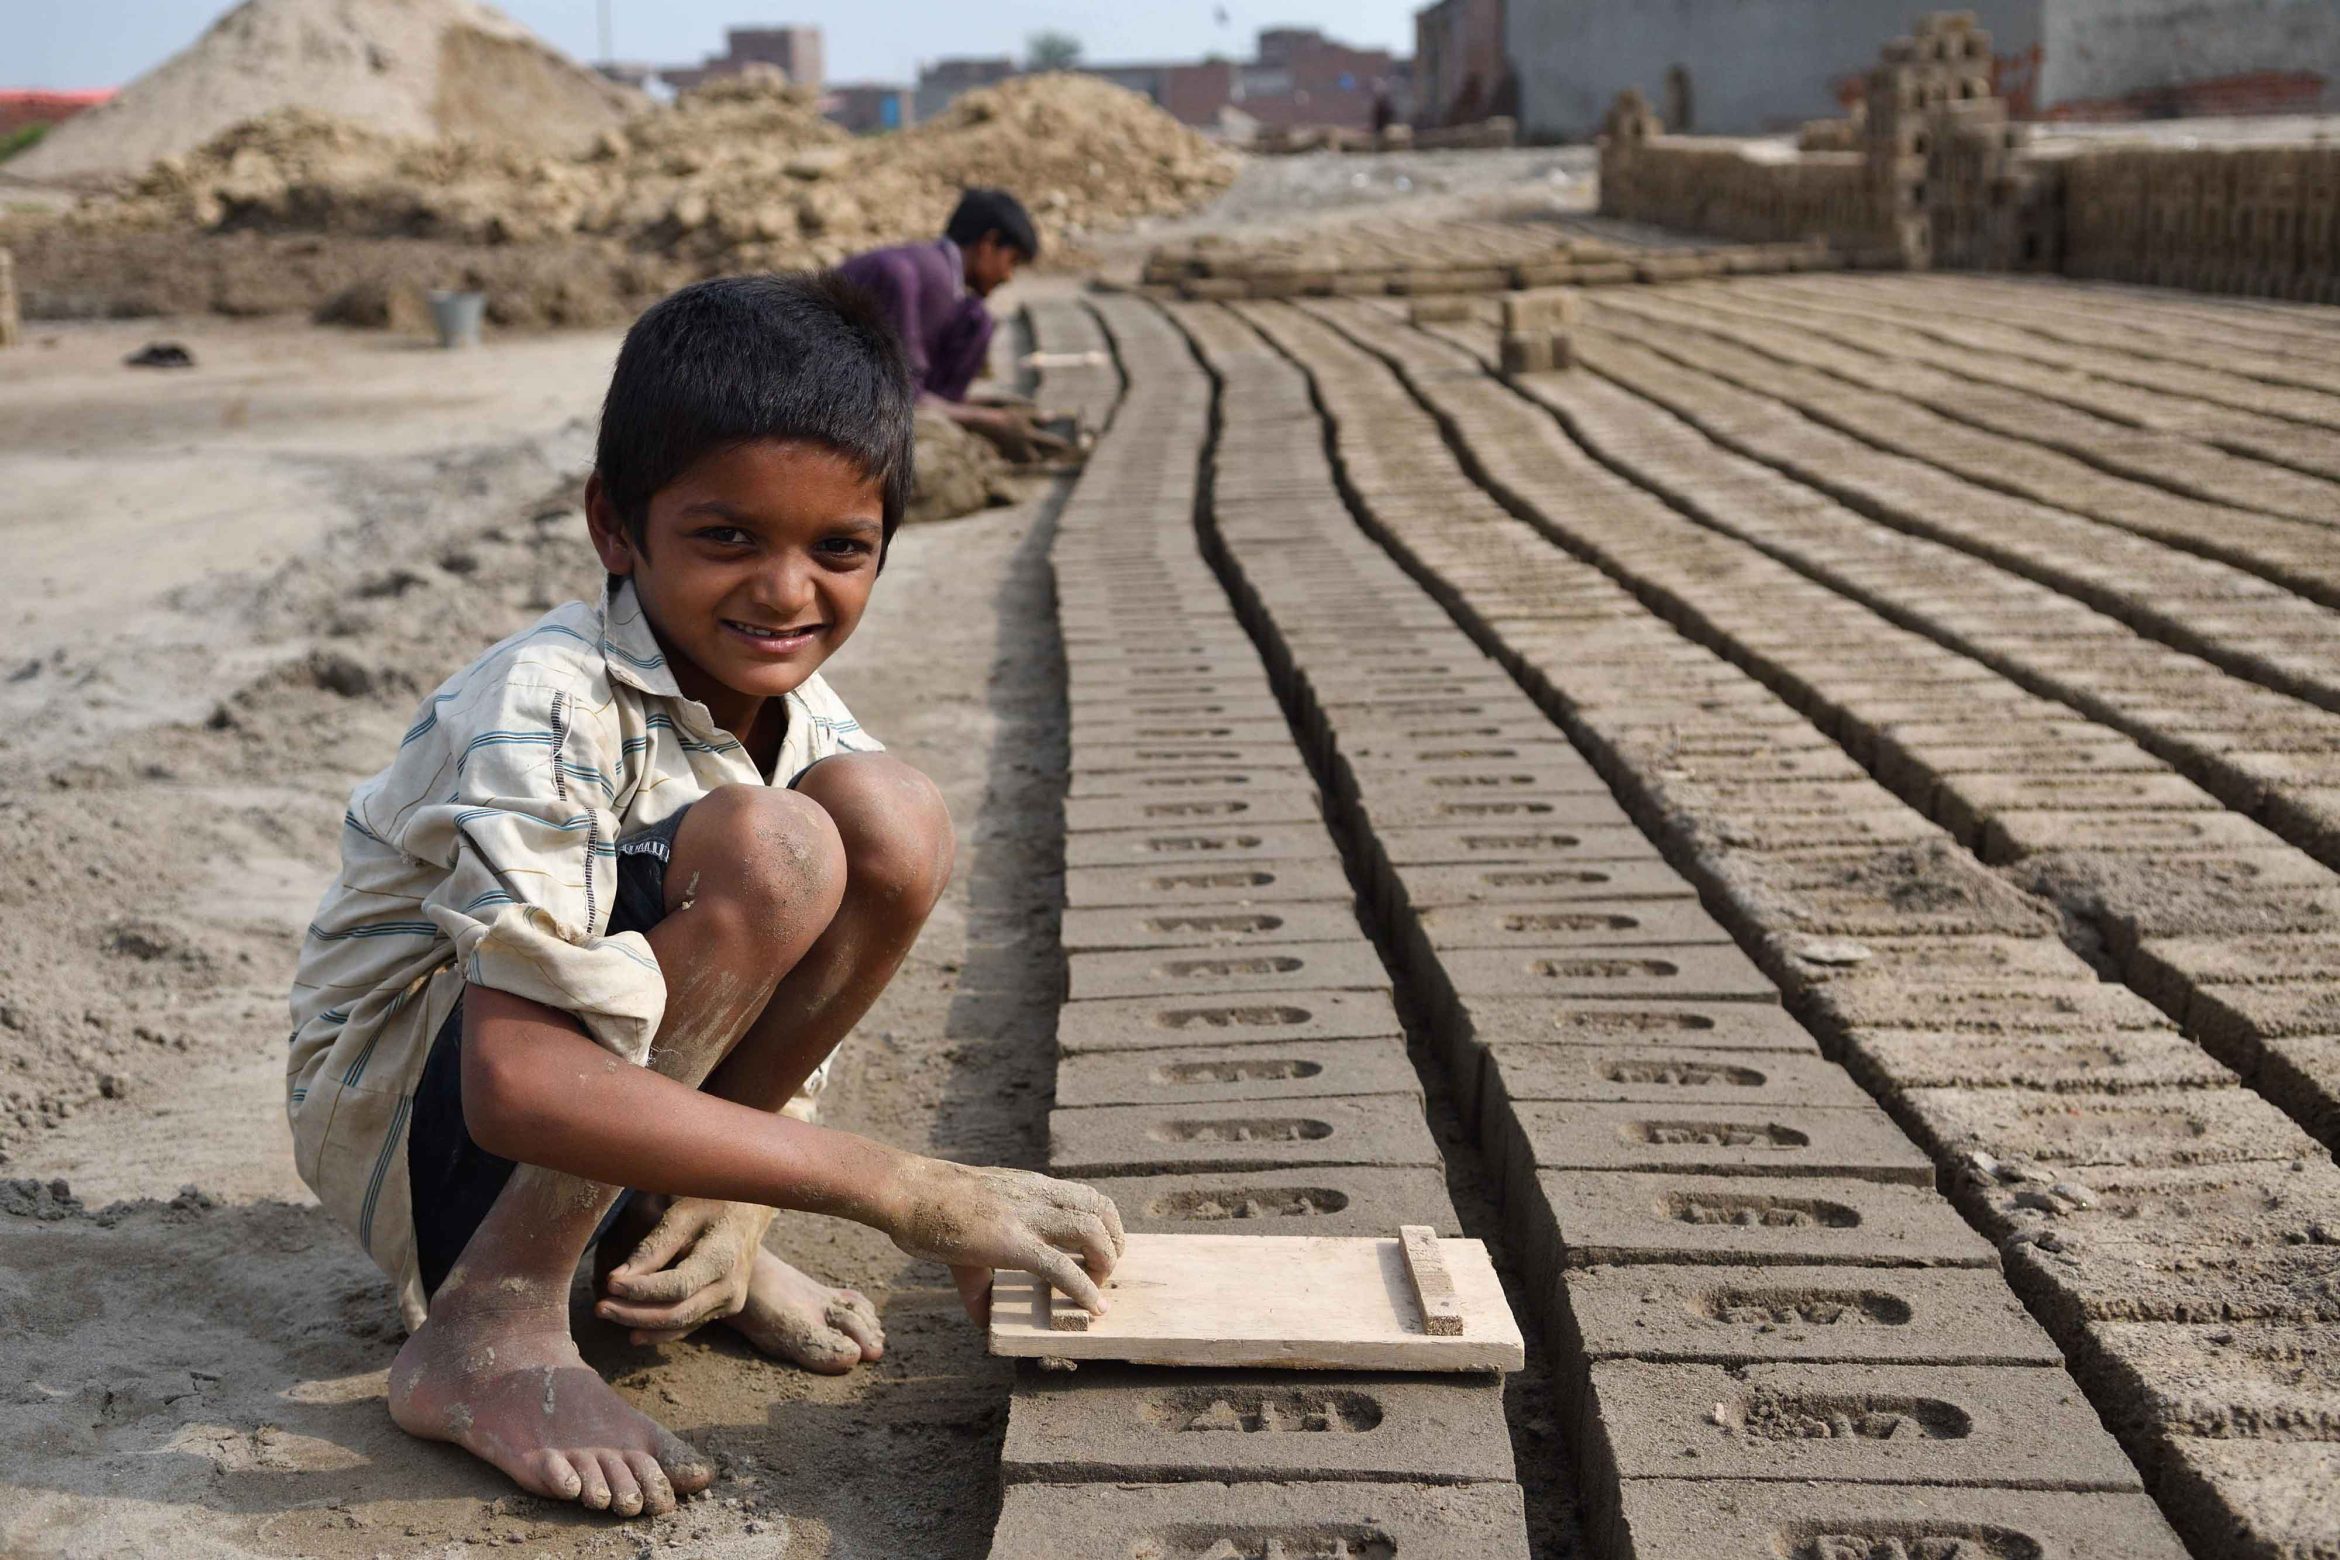 child labor in pakistan research paper